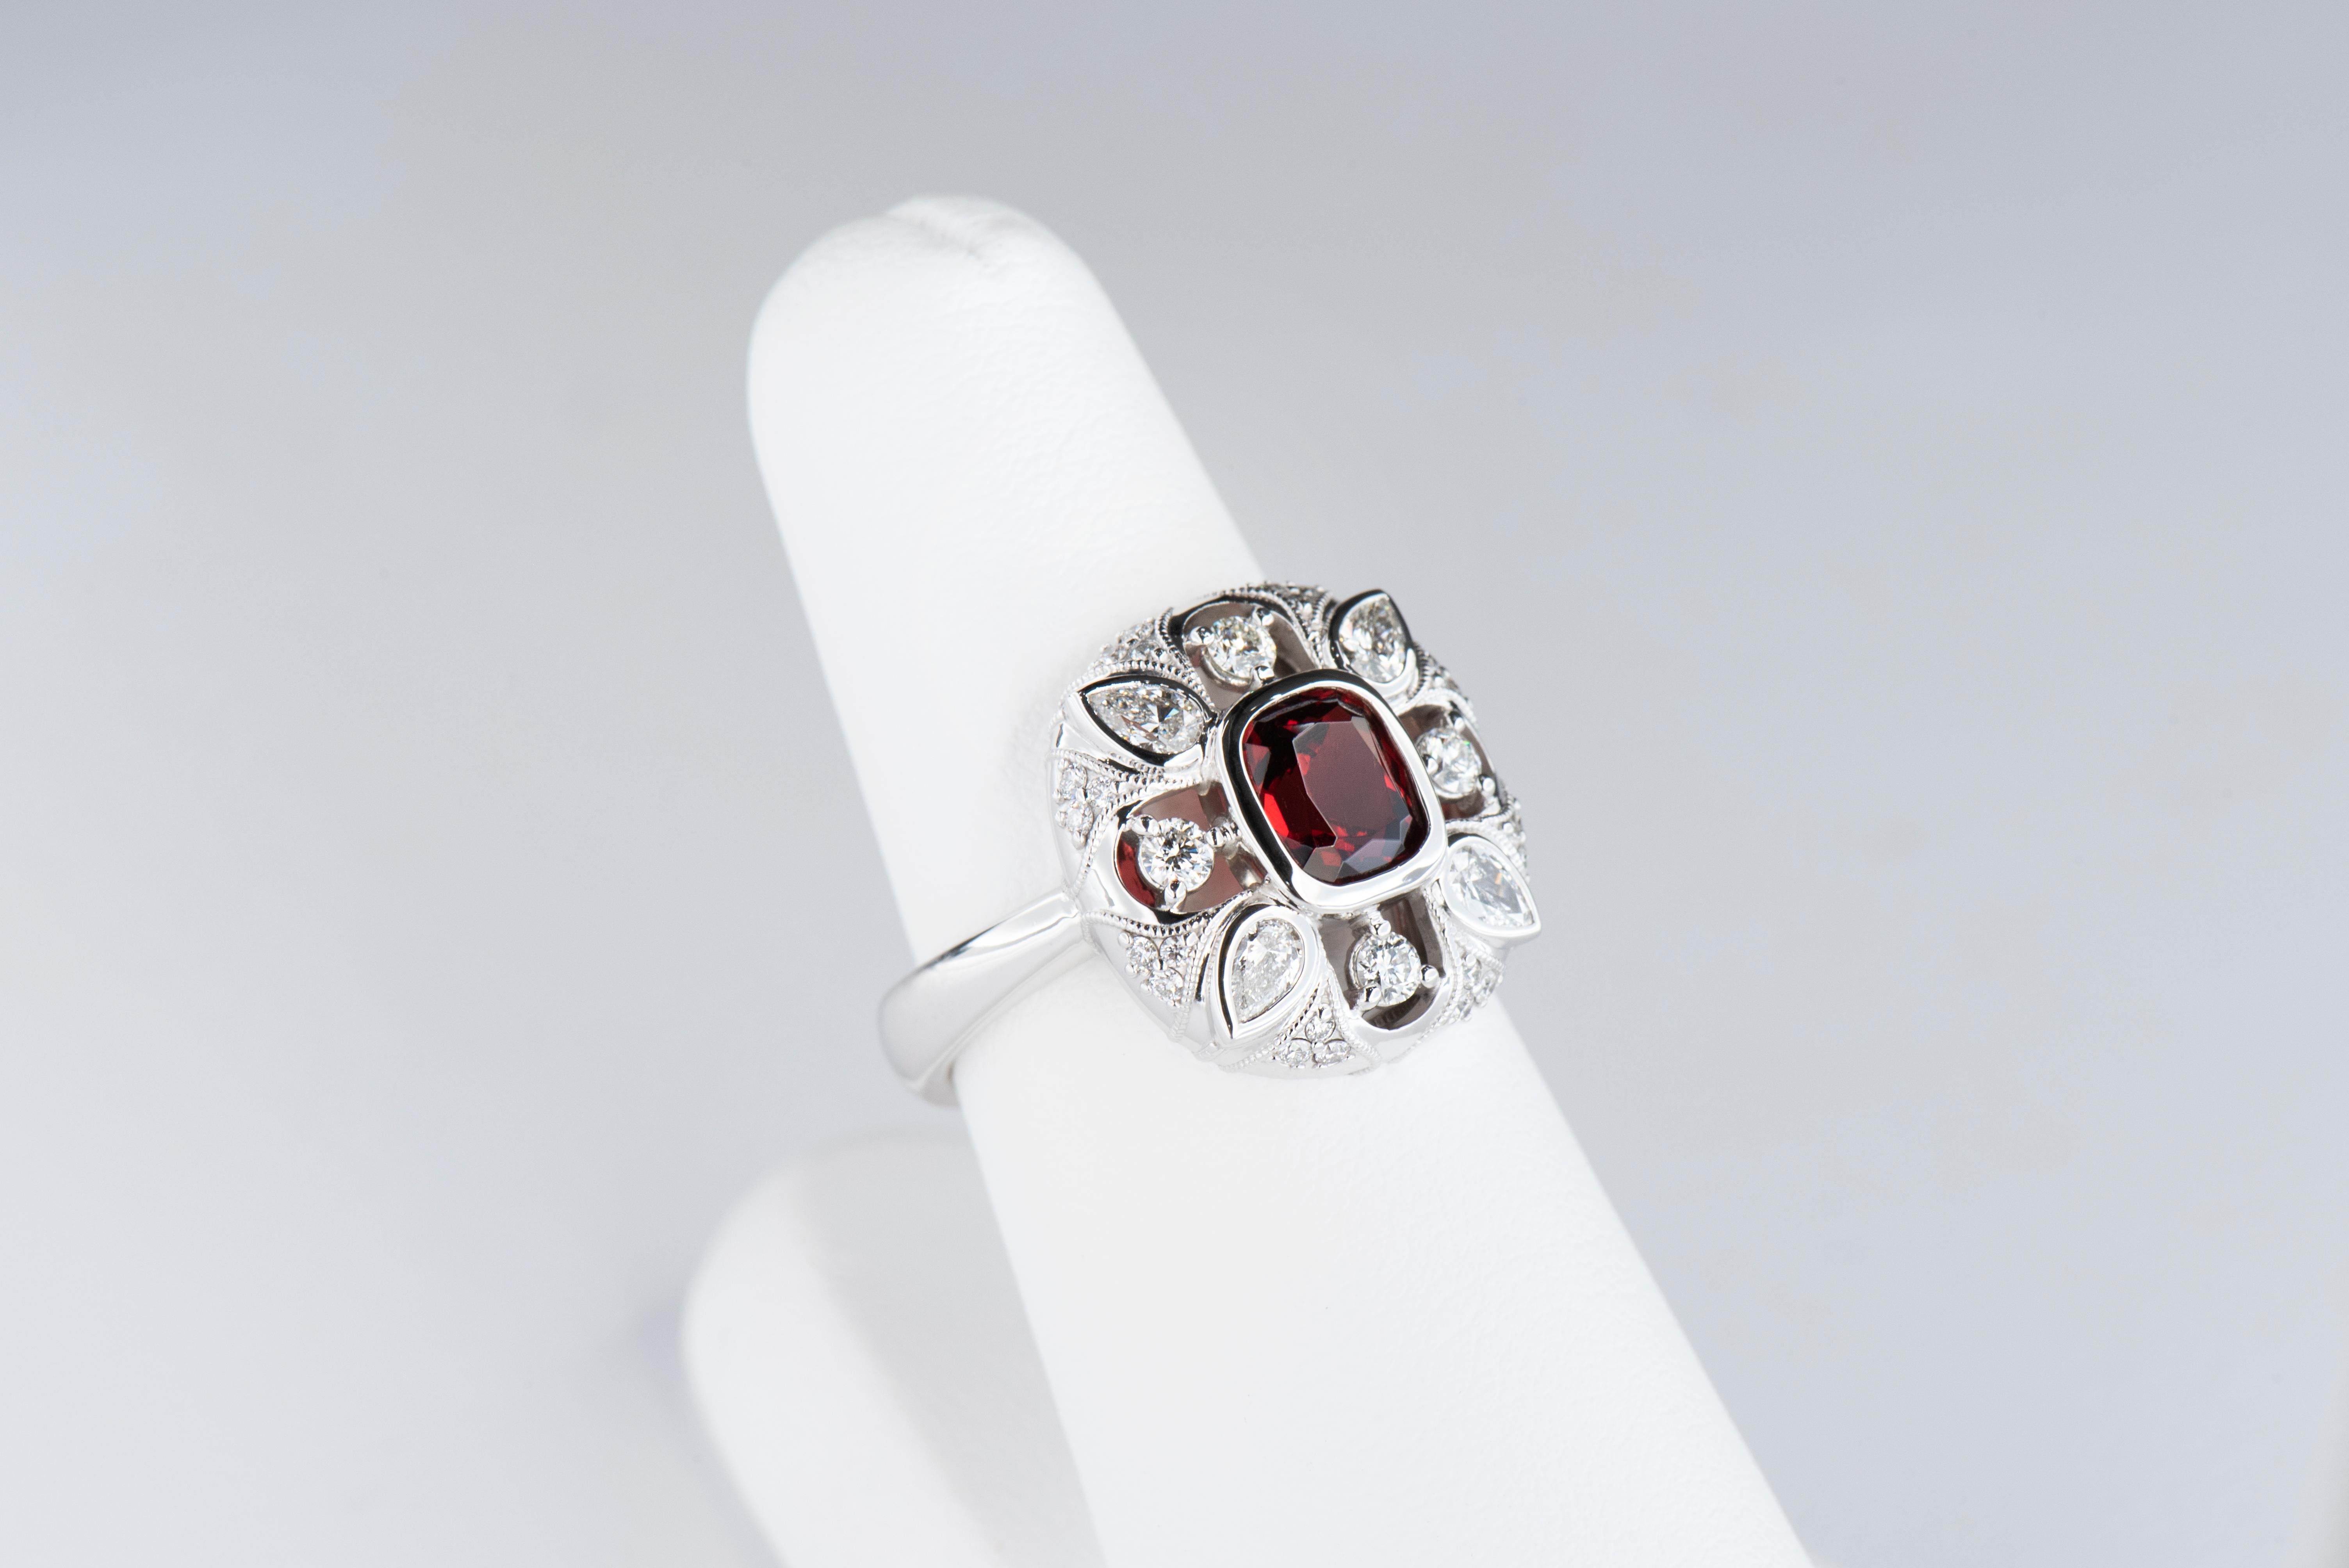 White Gold 1.51 Carat Cushion Red Spinel Cocktail Ring with Diamond Accents In New Condition For Sale In Lafayette, LA